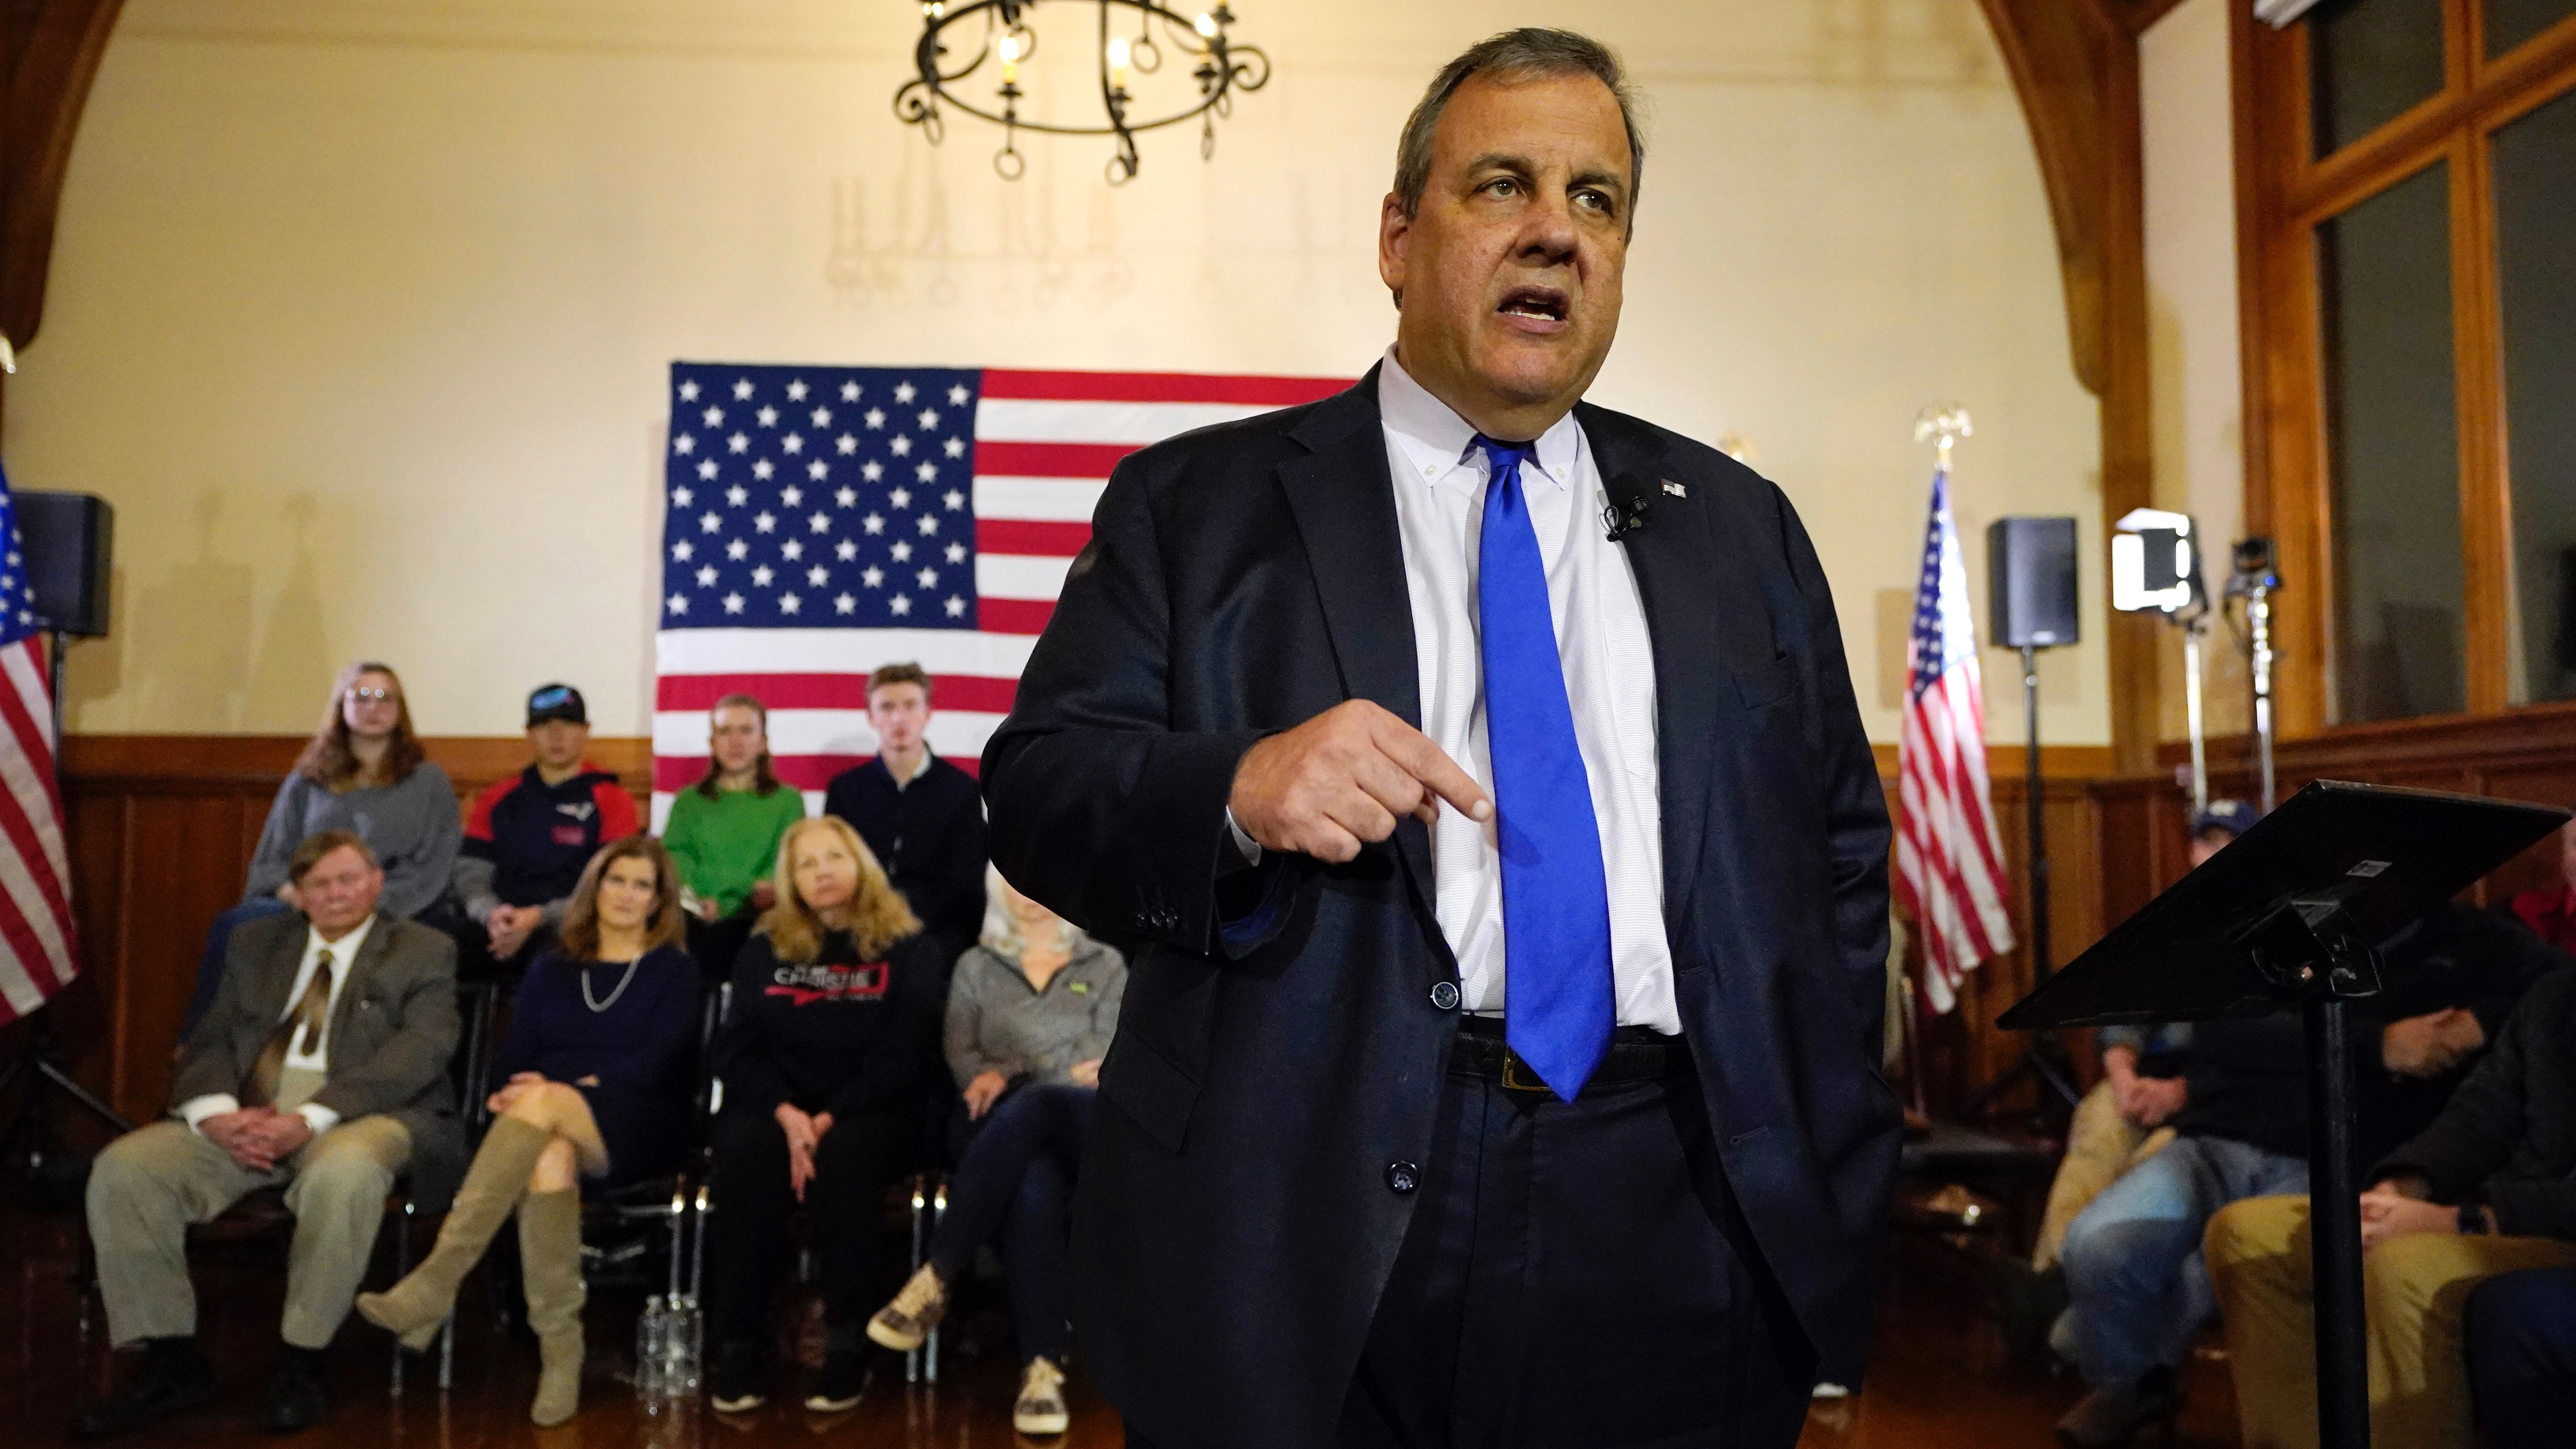 Former NJ Gov. Chris Christie Drops Out of 2024 Presidential Race, Citing Lack of Path to Victory and Refusing to Enable Trump's Return